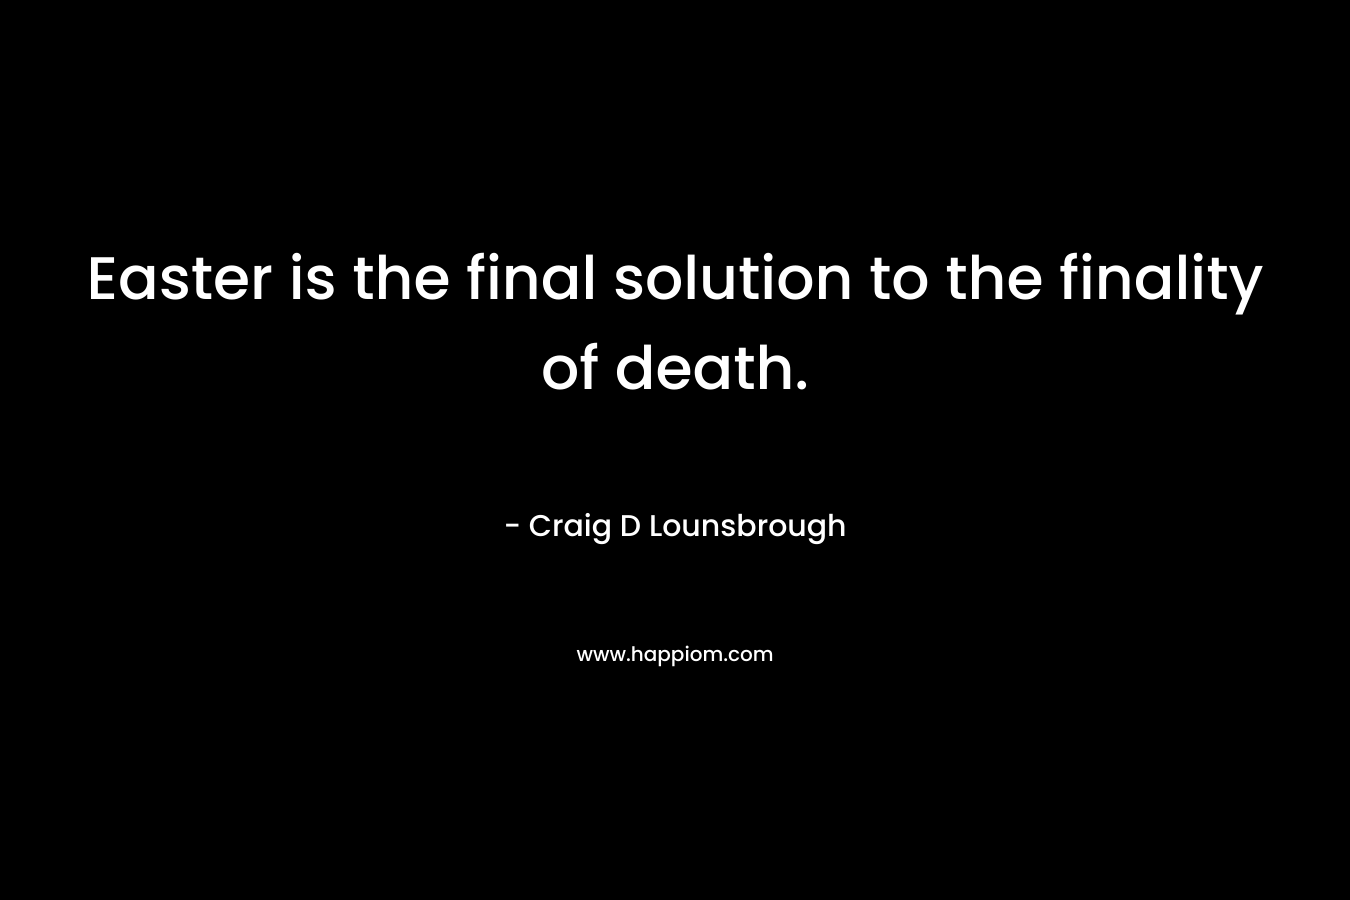 Easter is the final solution to the finality of death. – Craig D Lounsbrough